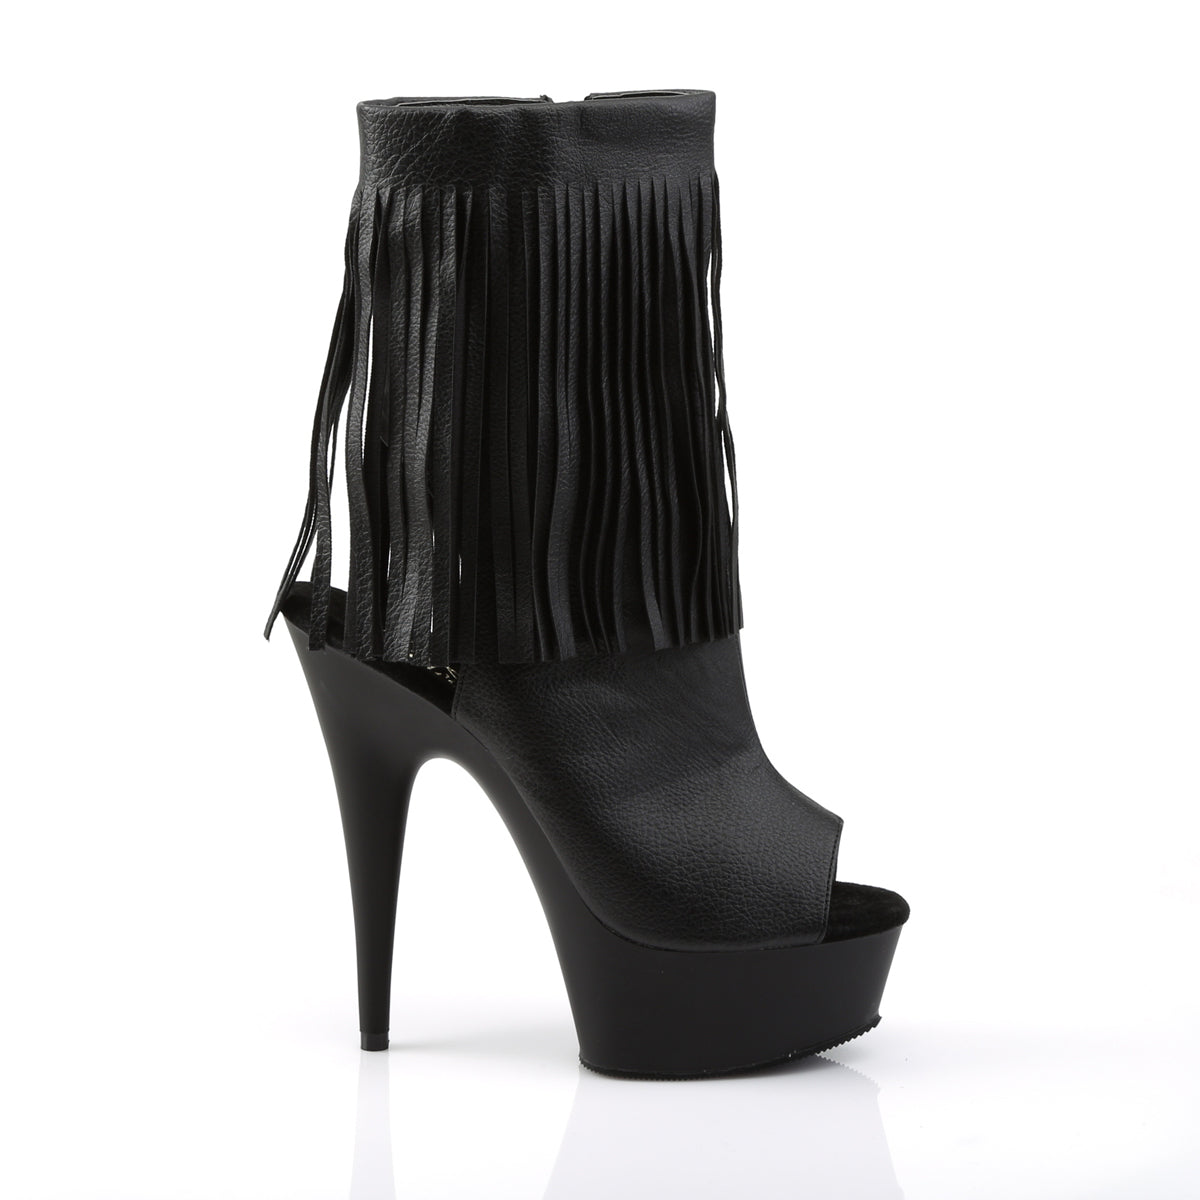 DELIGHT-1019 Black Faux Leather Boot Pleaser